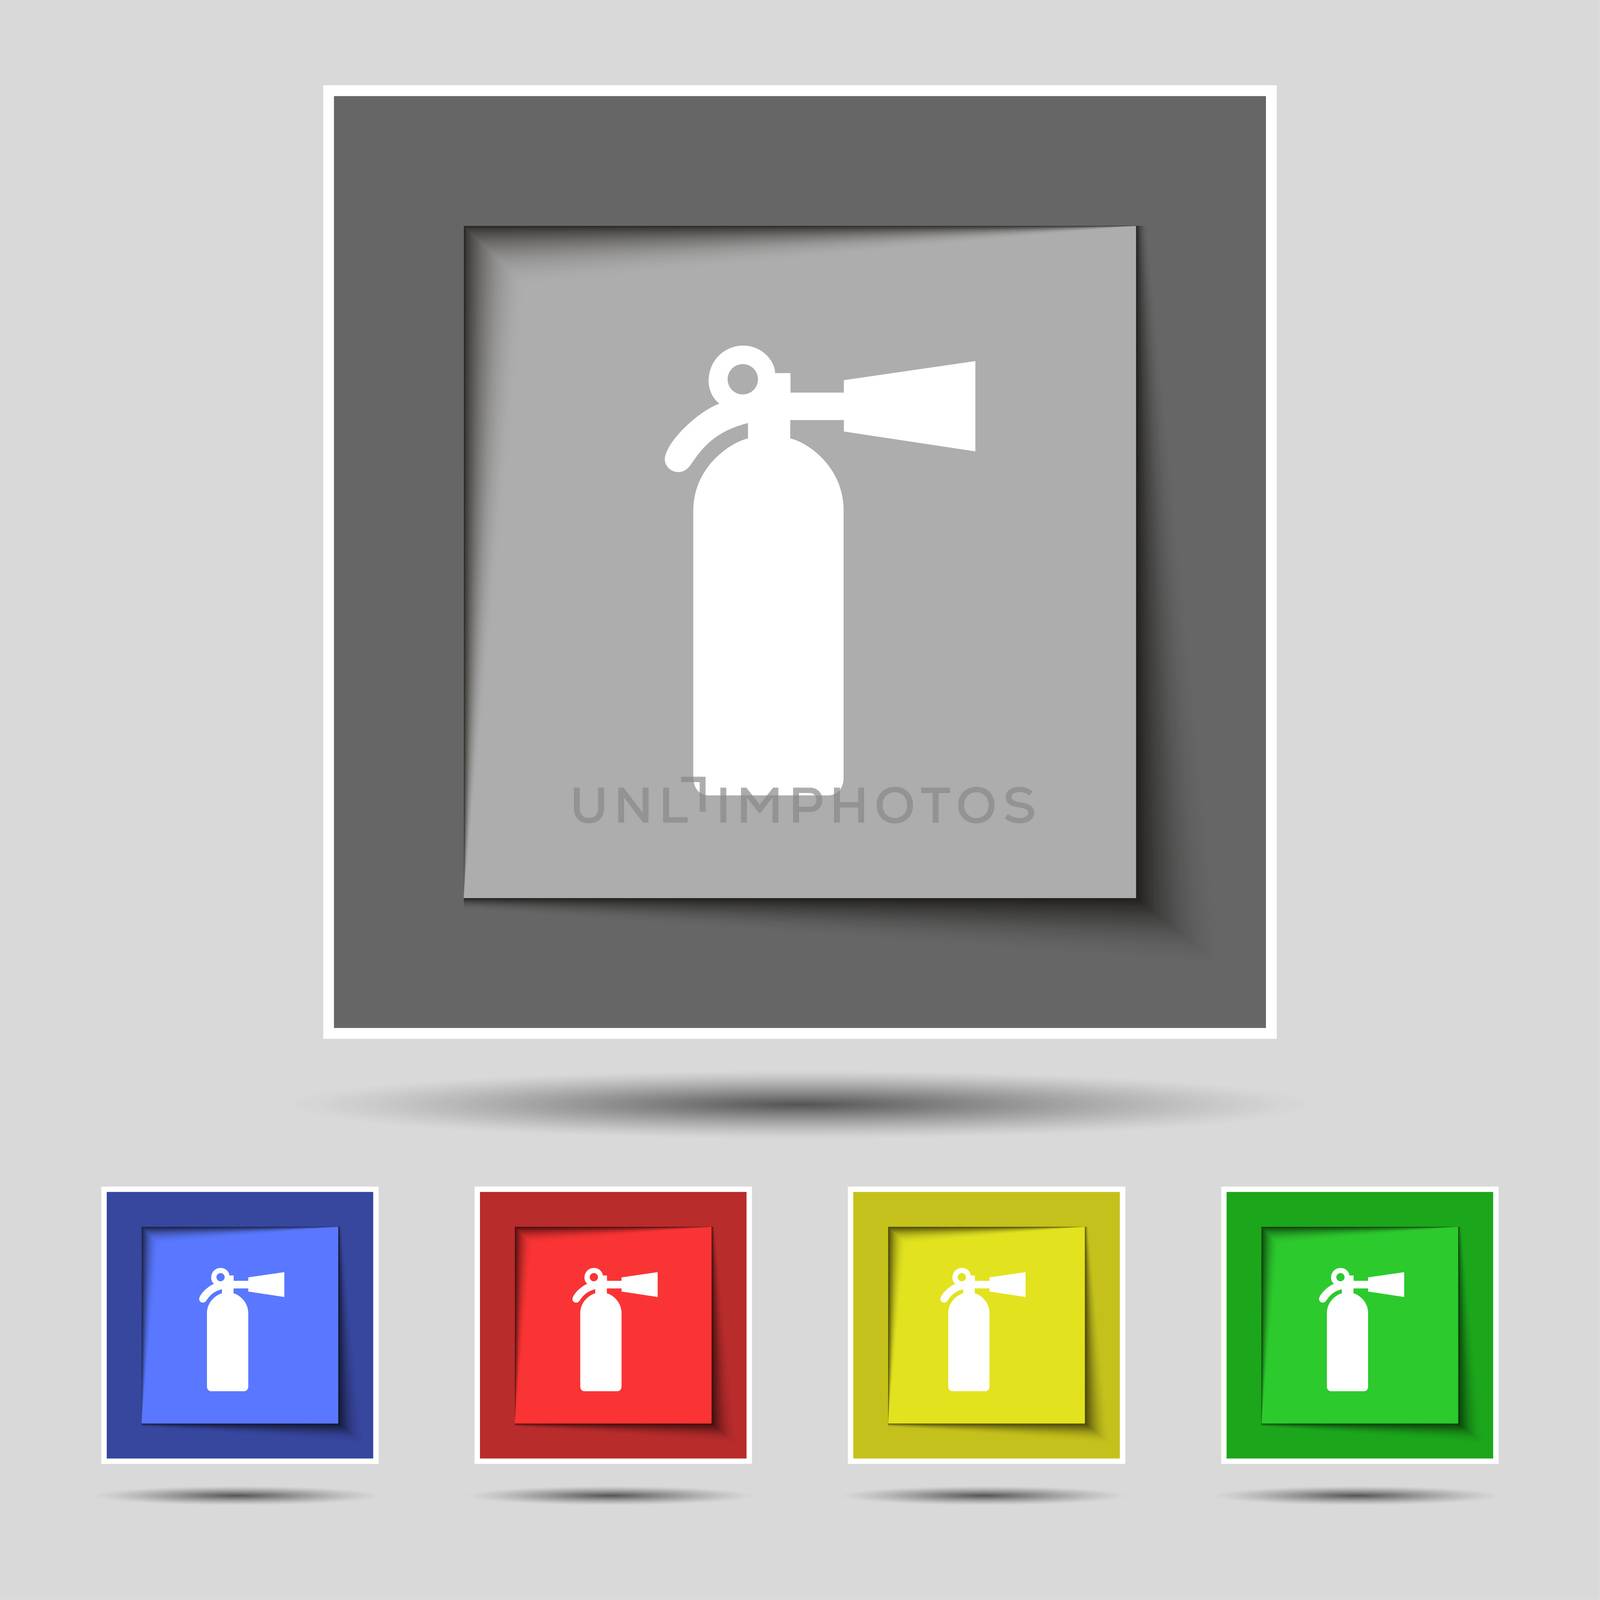 fire extinguisher icon sign on original five colored buttons. illustration